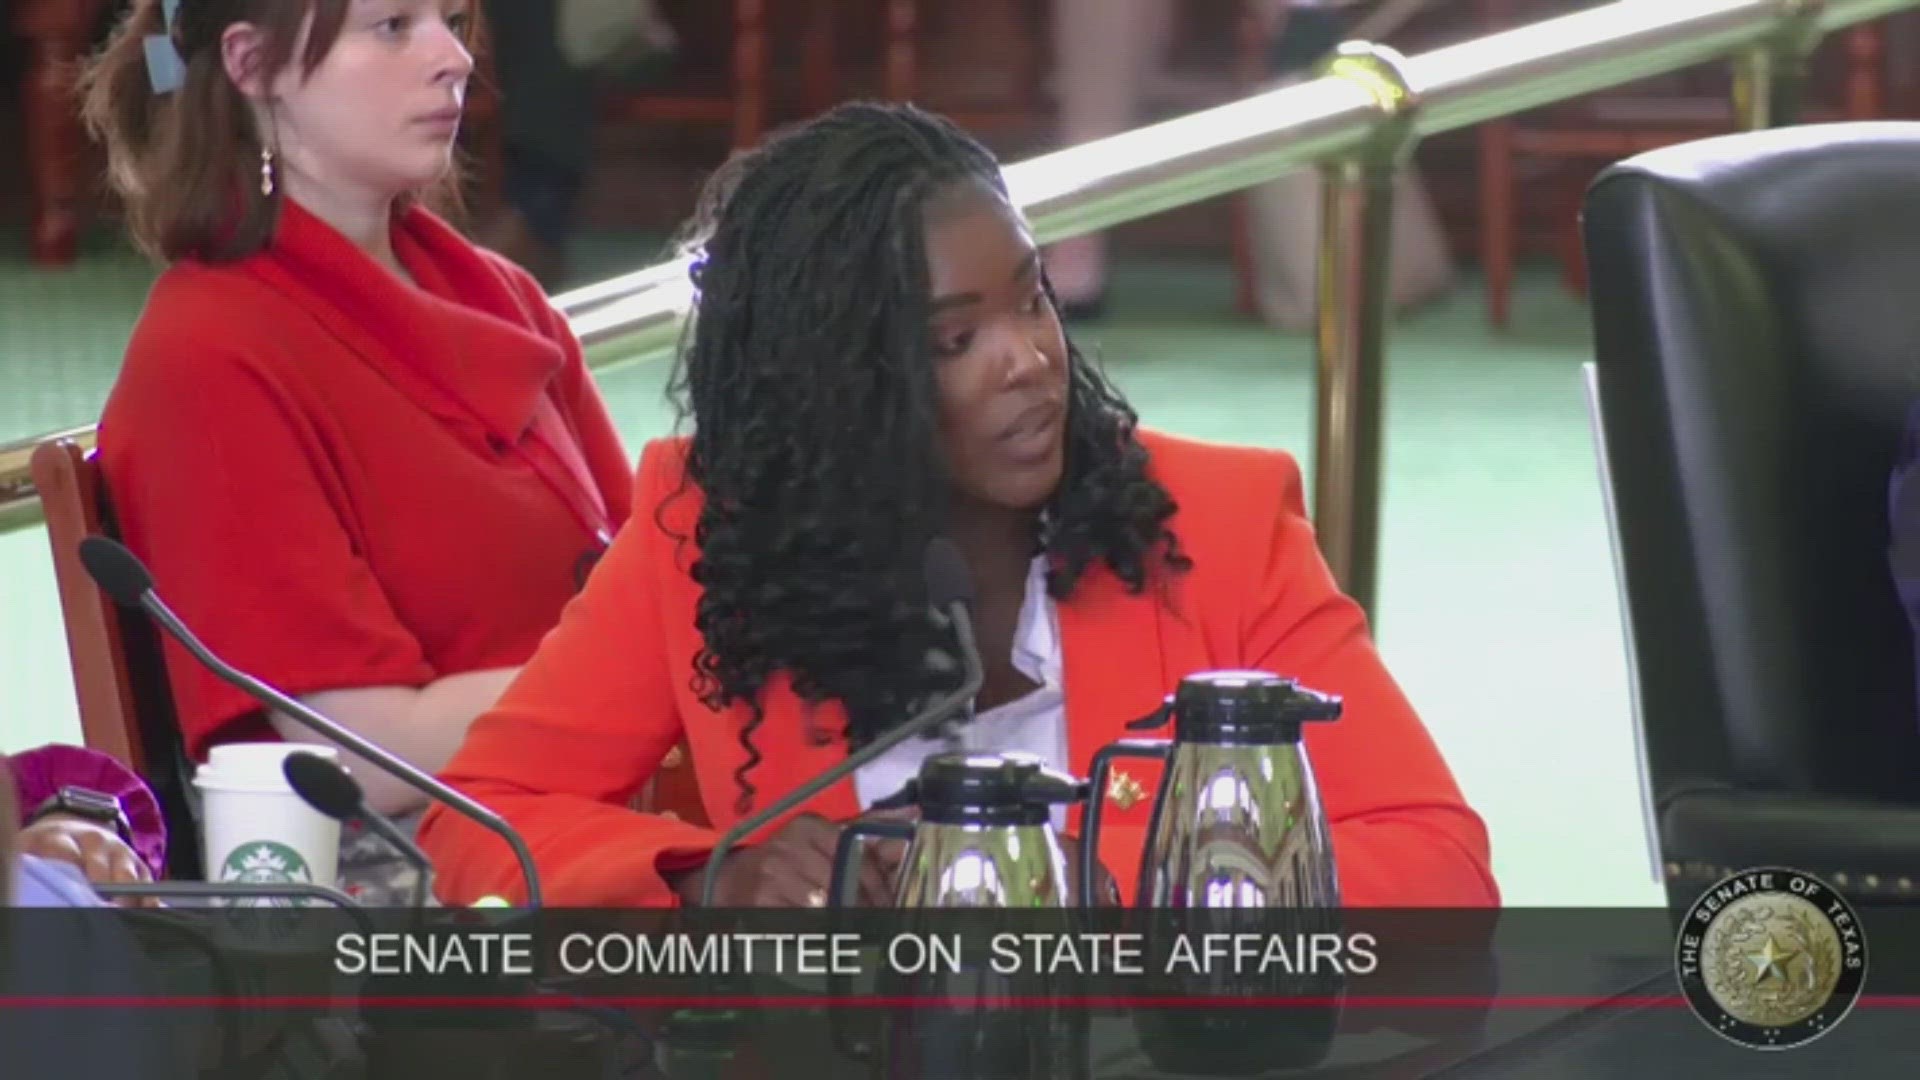 HB 567 would prohibit schools and workplaces from discriminating based on natural hair and certain hairstyles — including braids, dreadlocks and twists.